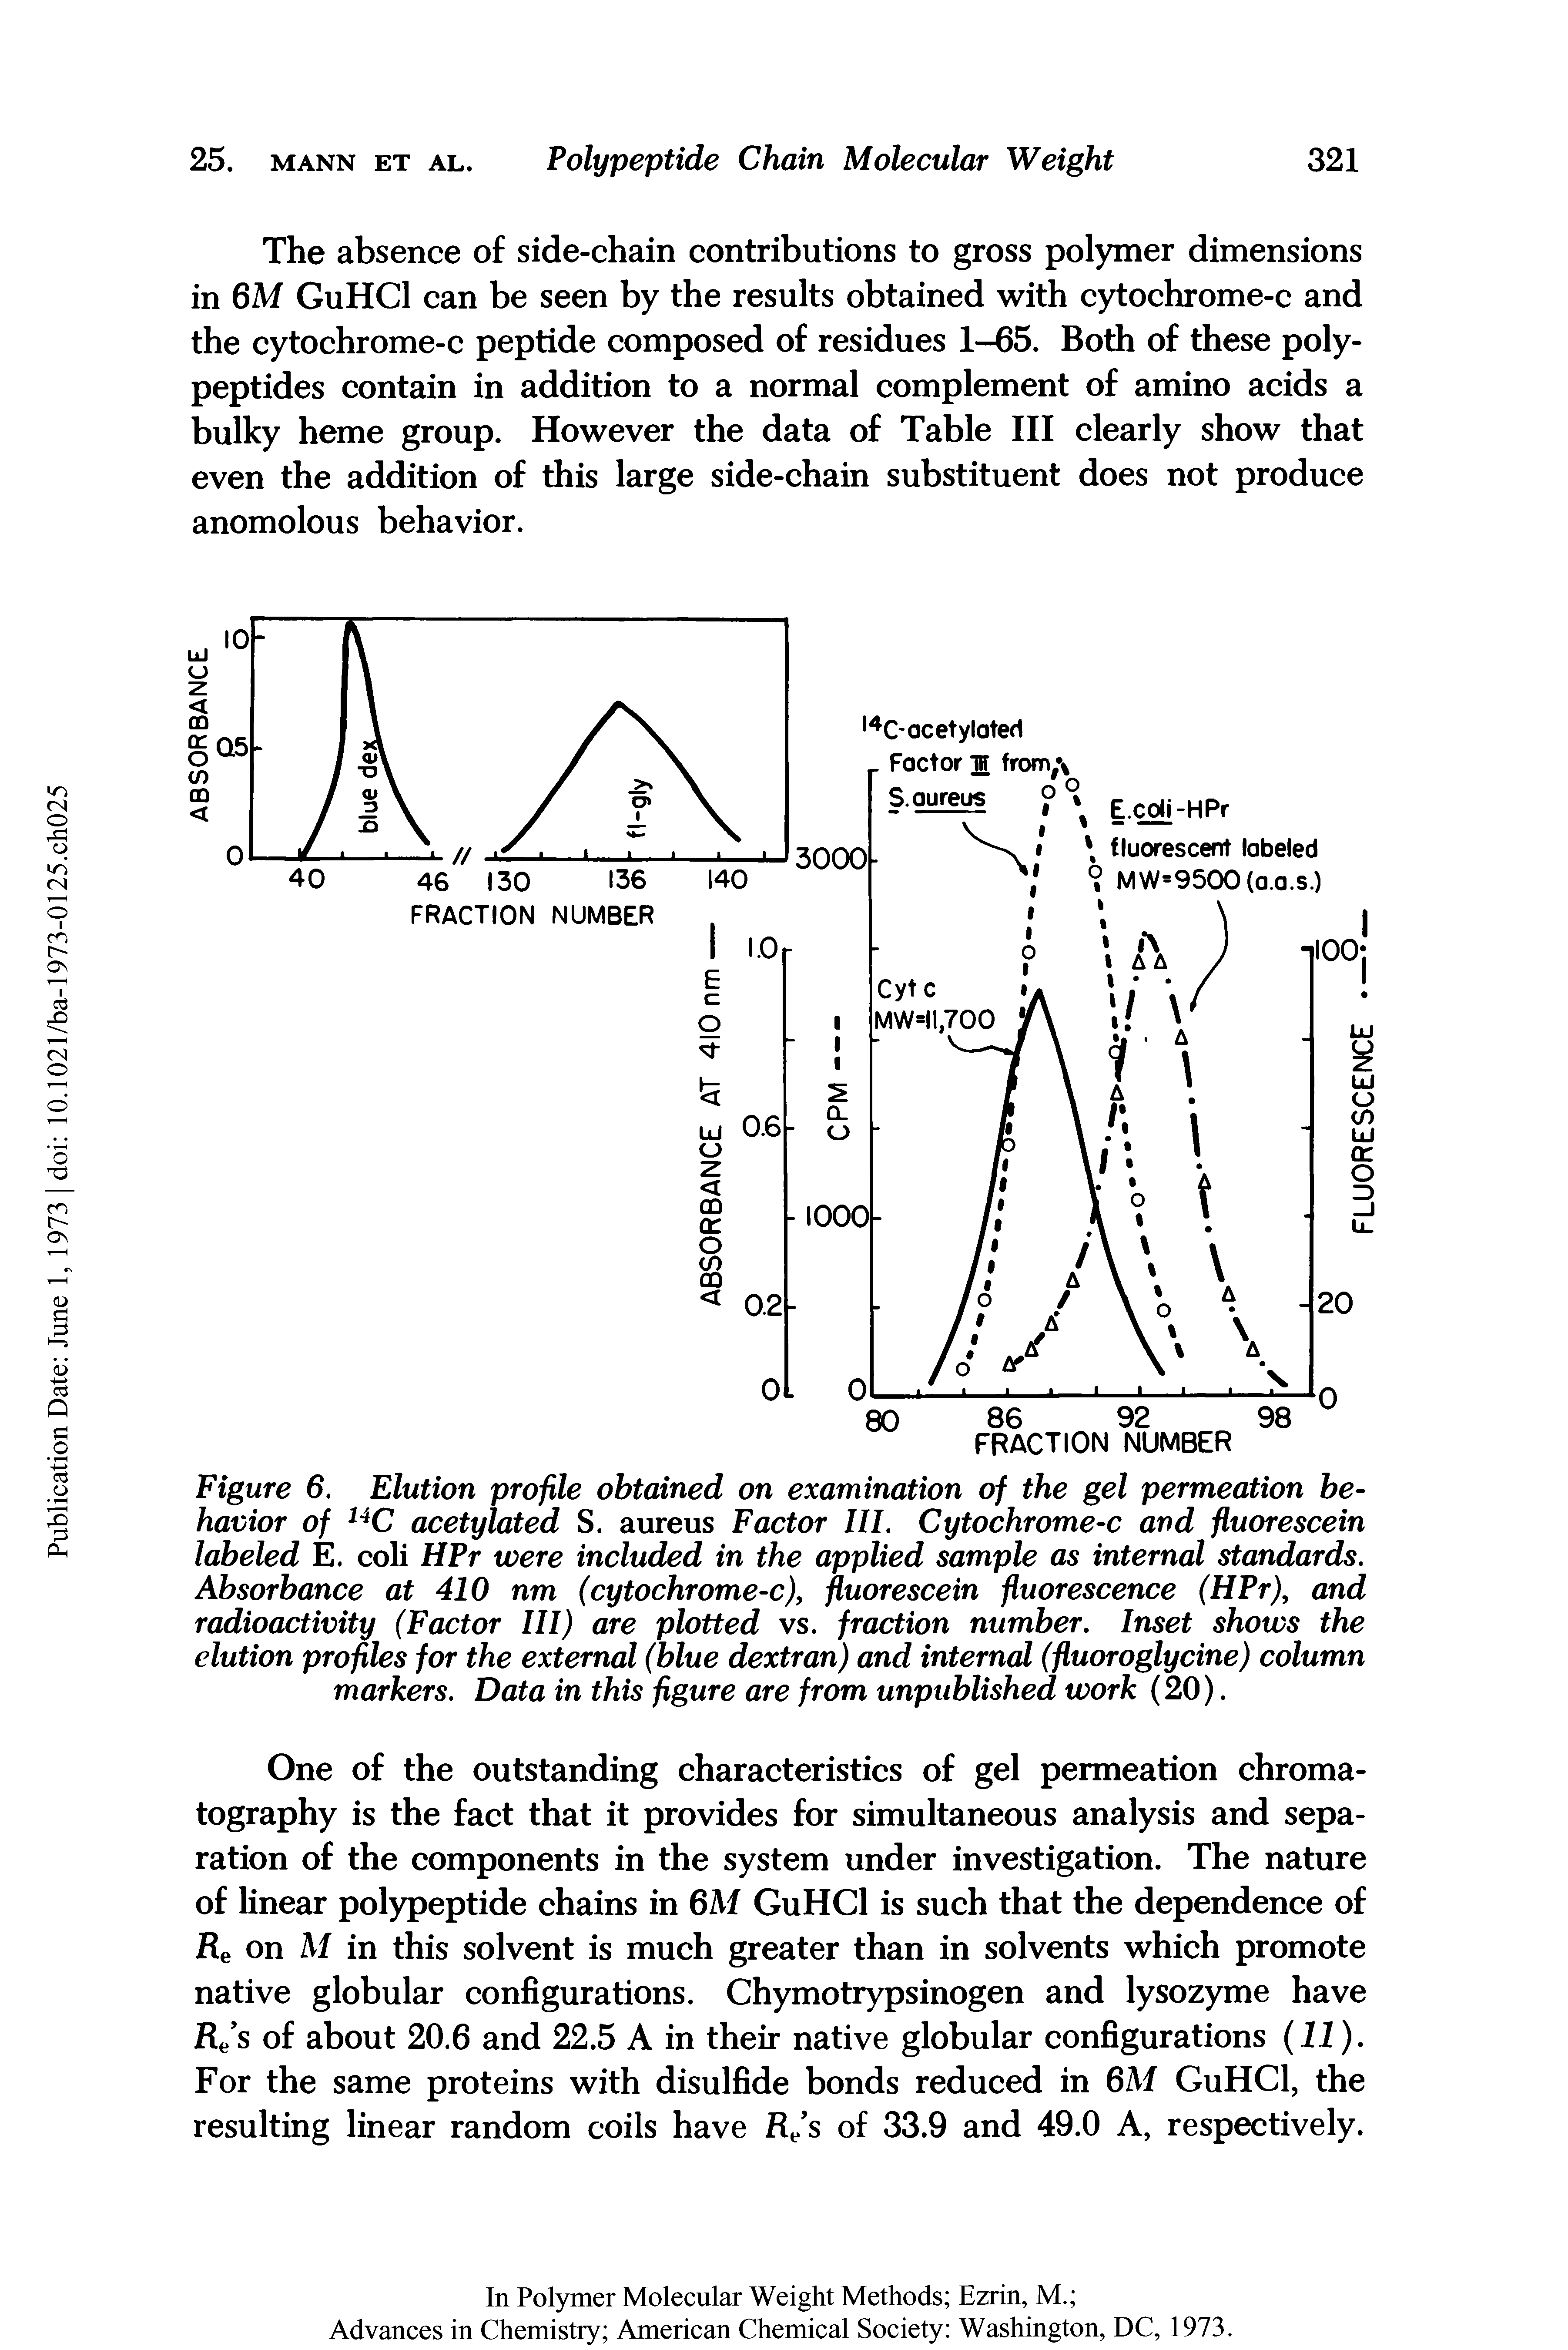 Figure 6. Elution profile obtained on examination of the gel permeation behavior of 14C acetylated S. aureus Factor III. Cytochrome-c and fluorescein labeled E. coli HPr were included in the applied sample as internal standards. Absorbance at 410 nm (cytochrome-c), fluorescein fluorescence (HPr), and radioactivity (Factor III) are plotted vs. fraction number. Inset shows the elution profiles for the external (blue dextran) and internal (fiuoroglycine) column markers. Data in this figure are from unpublished work (20).